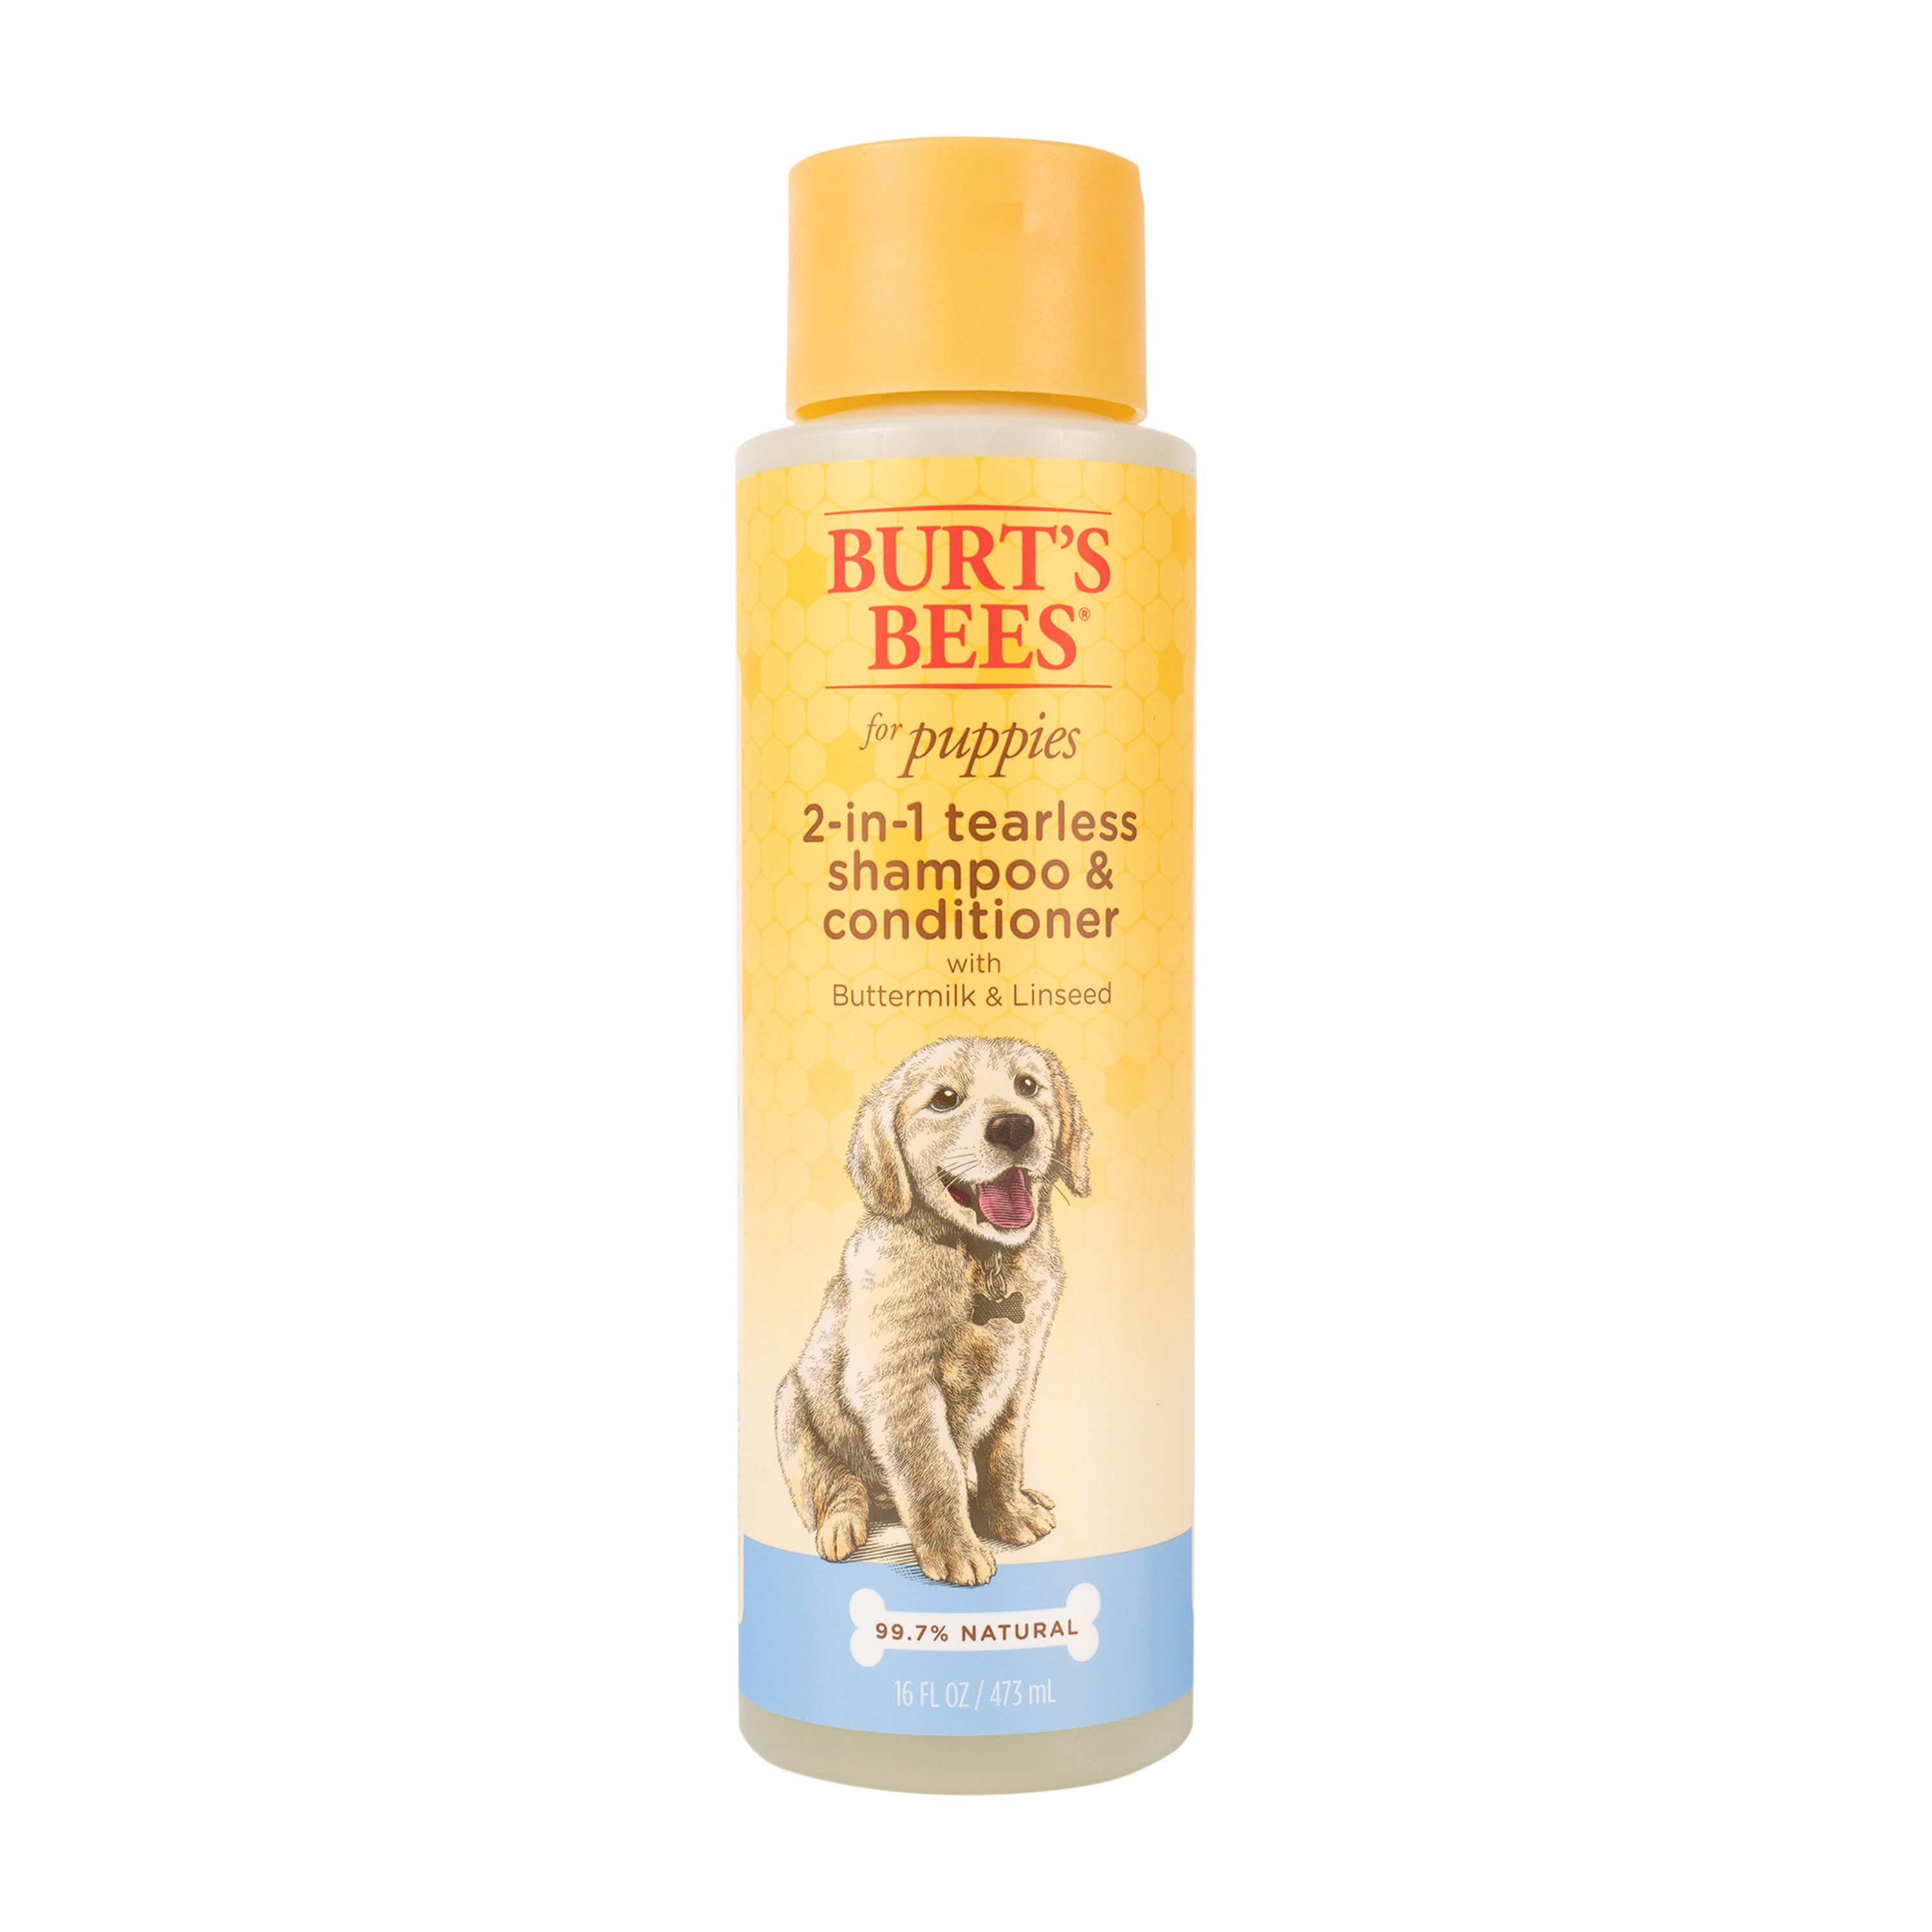 Burt's Bees Natural Pet Care Tearless 2 in 1 Puppy Shampoo and Conditioner with Buttermilk and Linseed Oil, 16 oz.